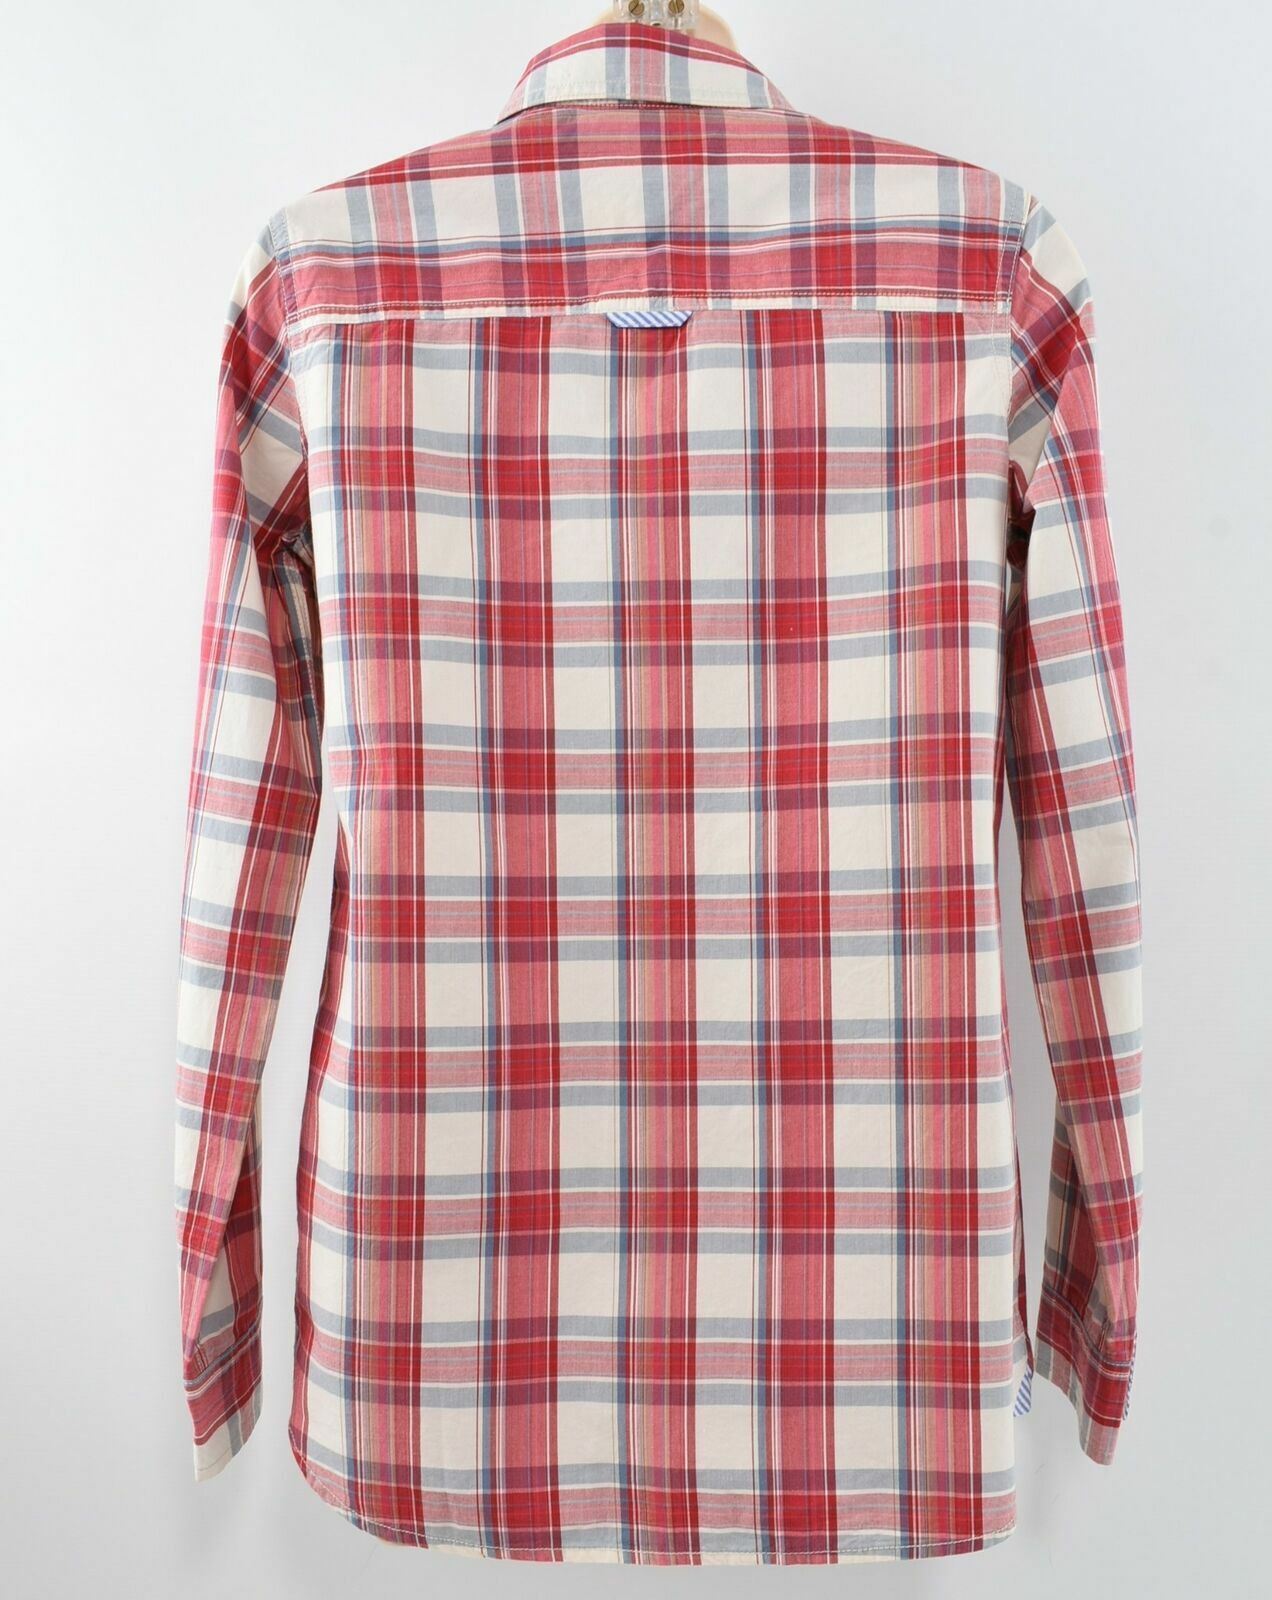 TOMMY HILFIGER Women's Red Plaid Long Sleeved Collared Shirt- UK 6 EU 34